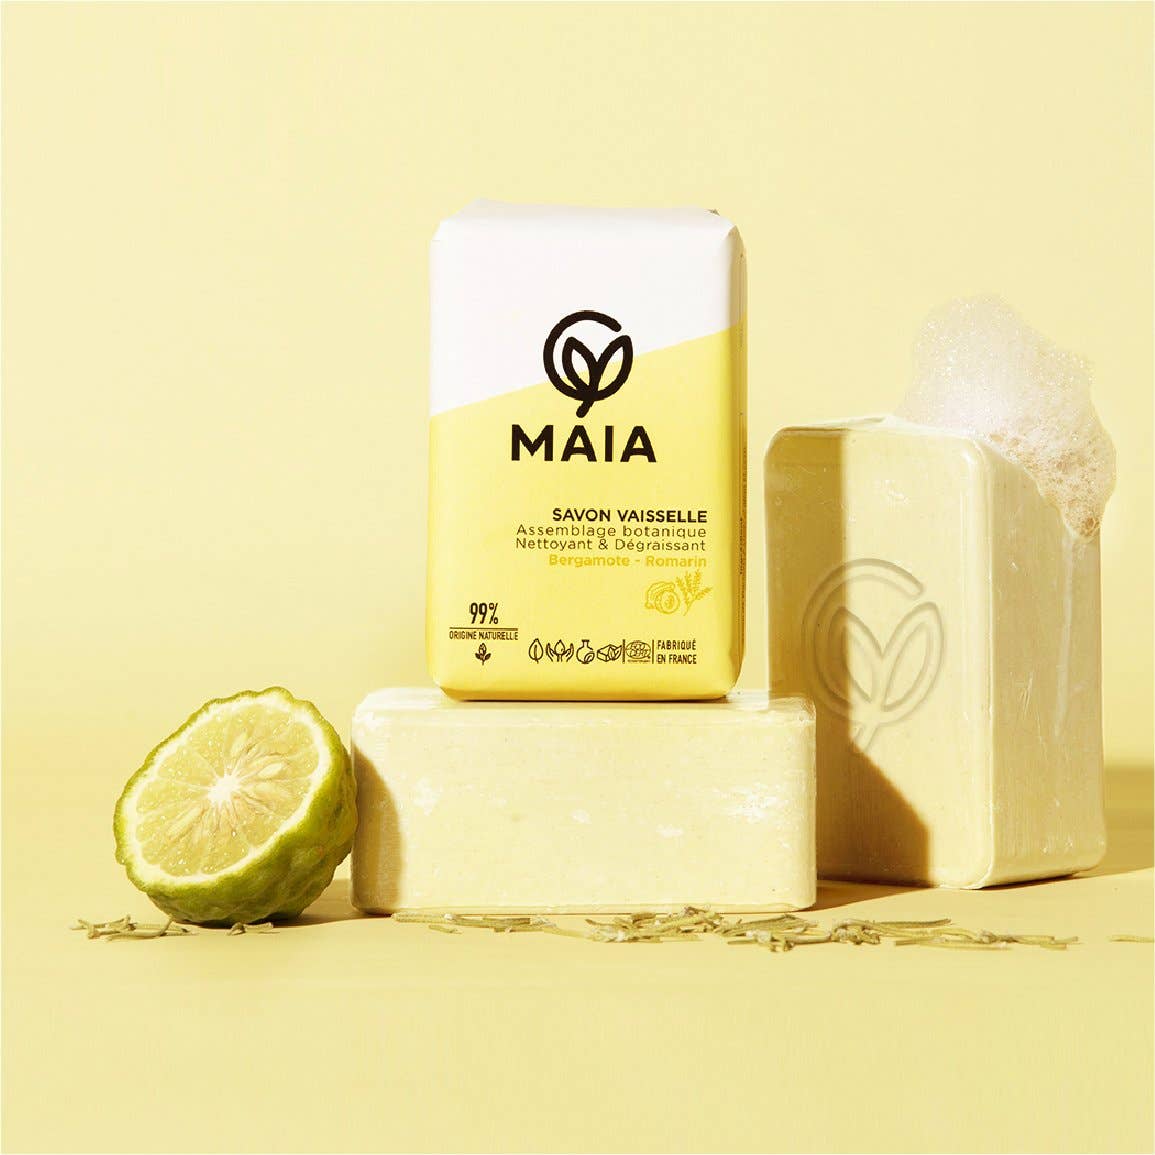 Maia wholesale products